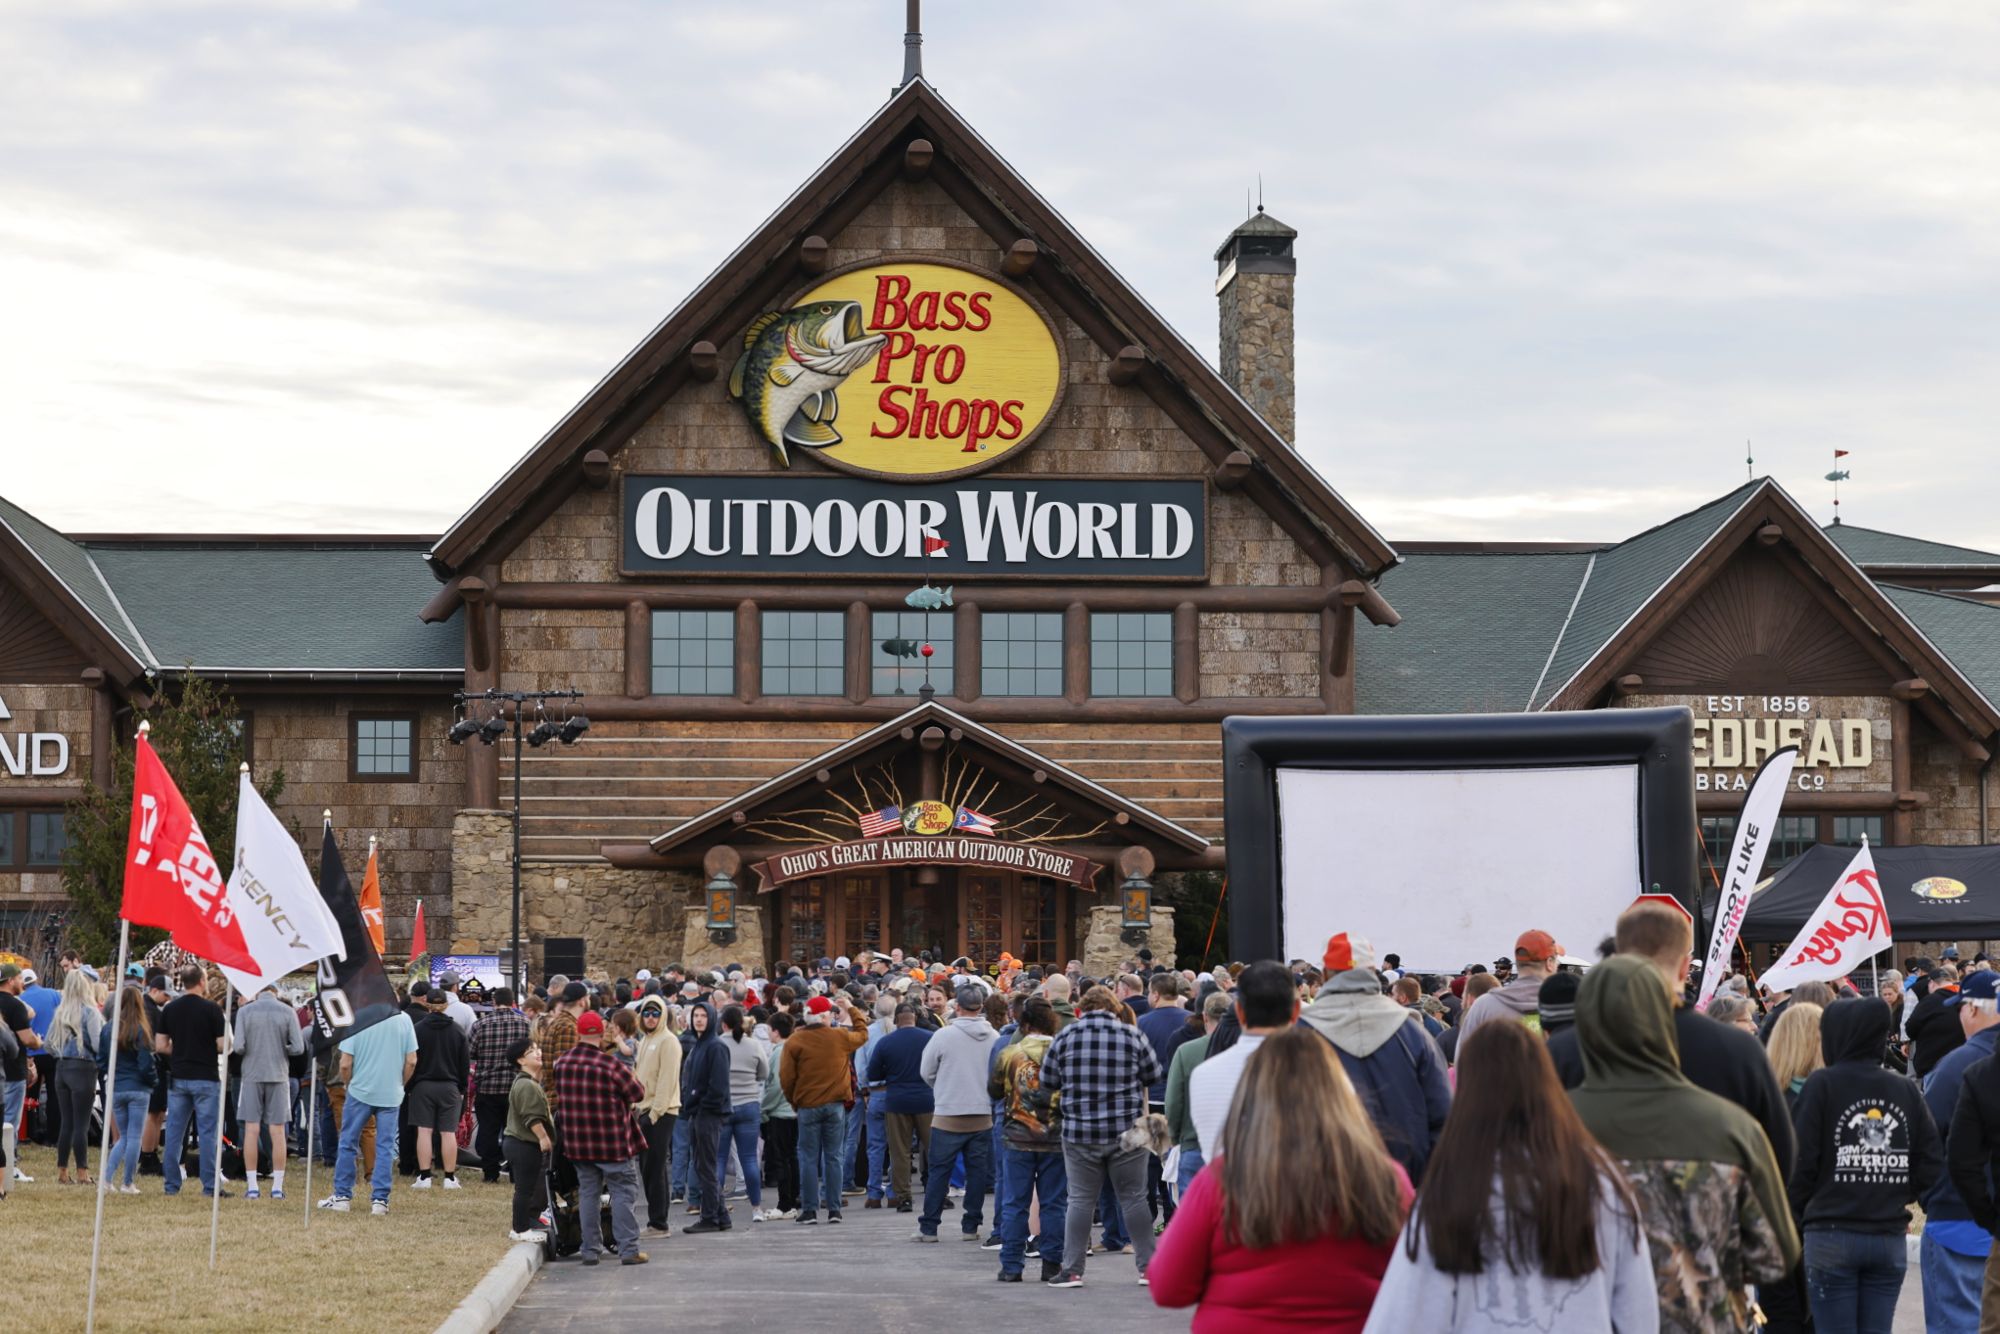 Why people are excited about the huge new Bass Pro Shops in southwest Ohio